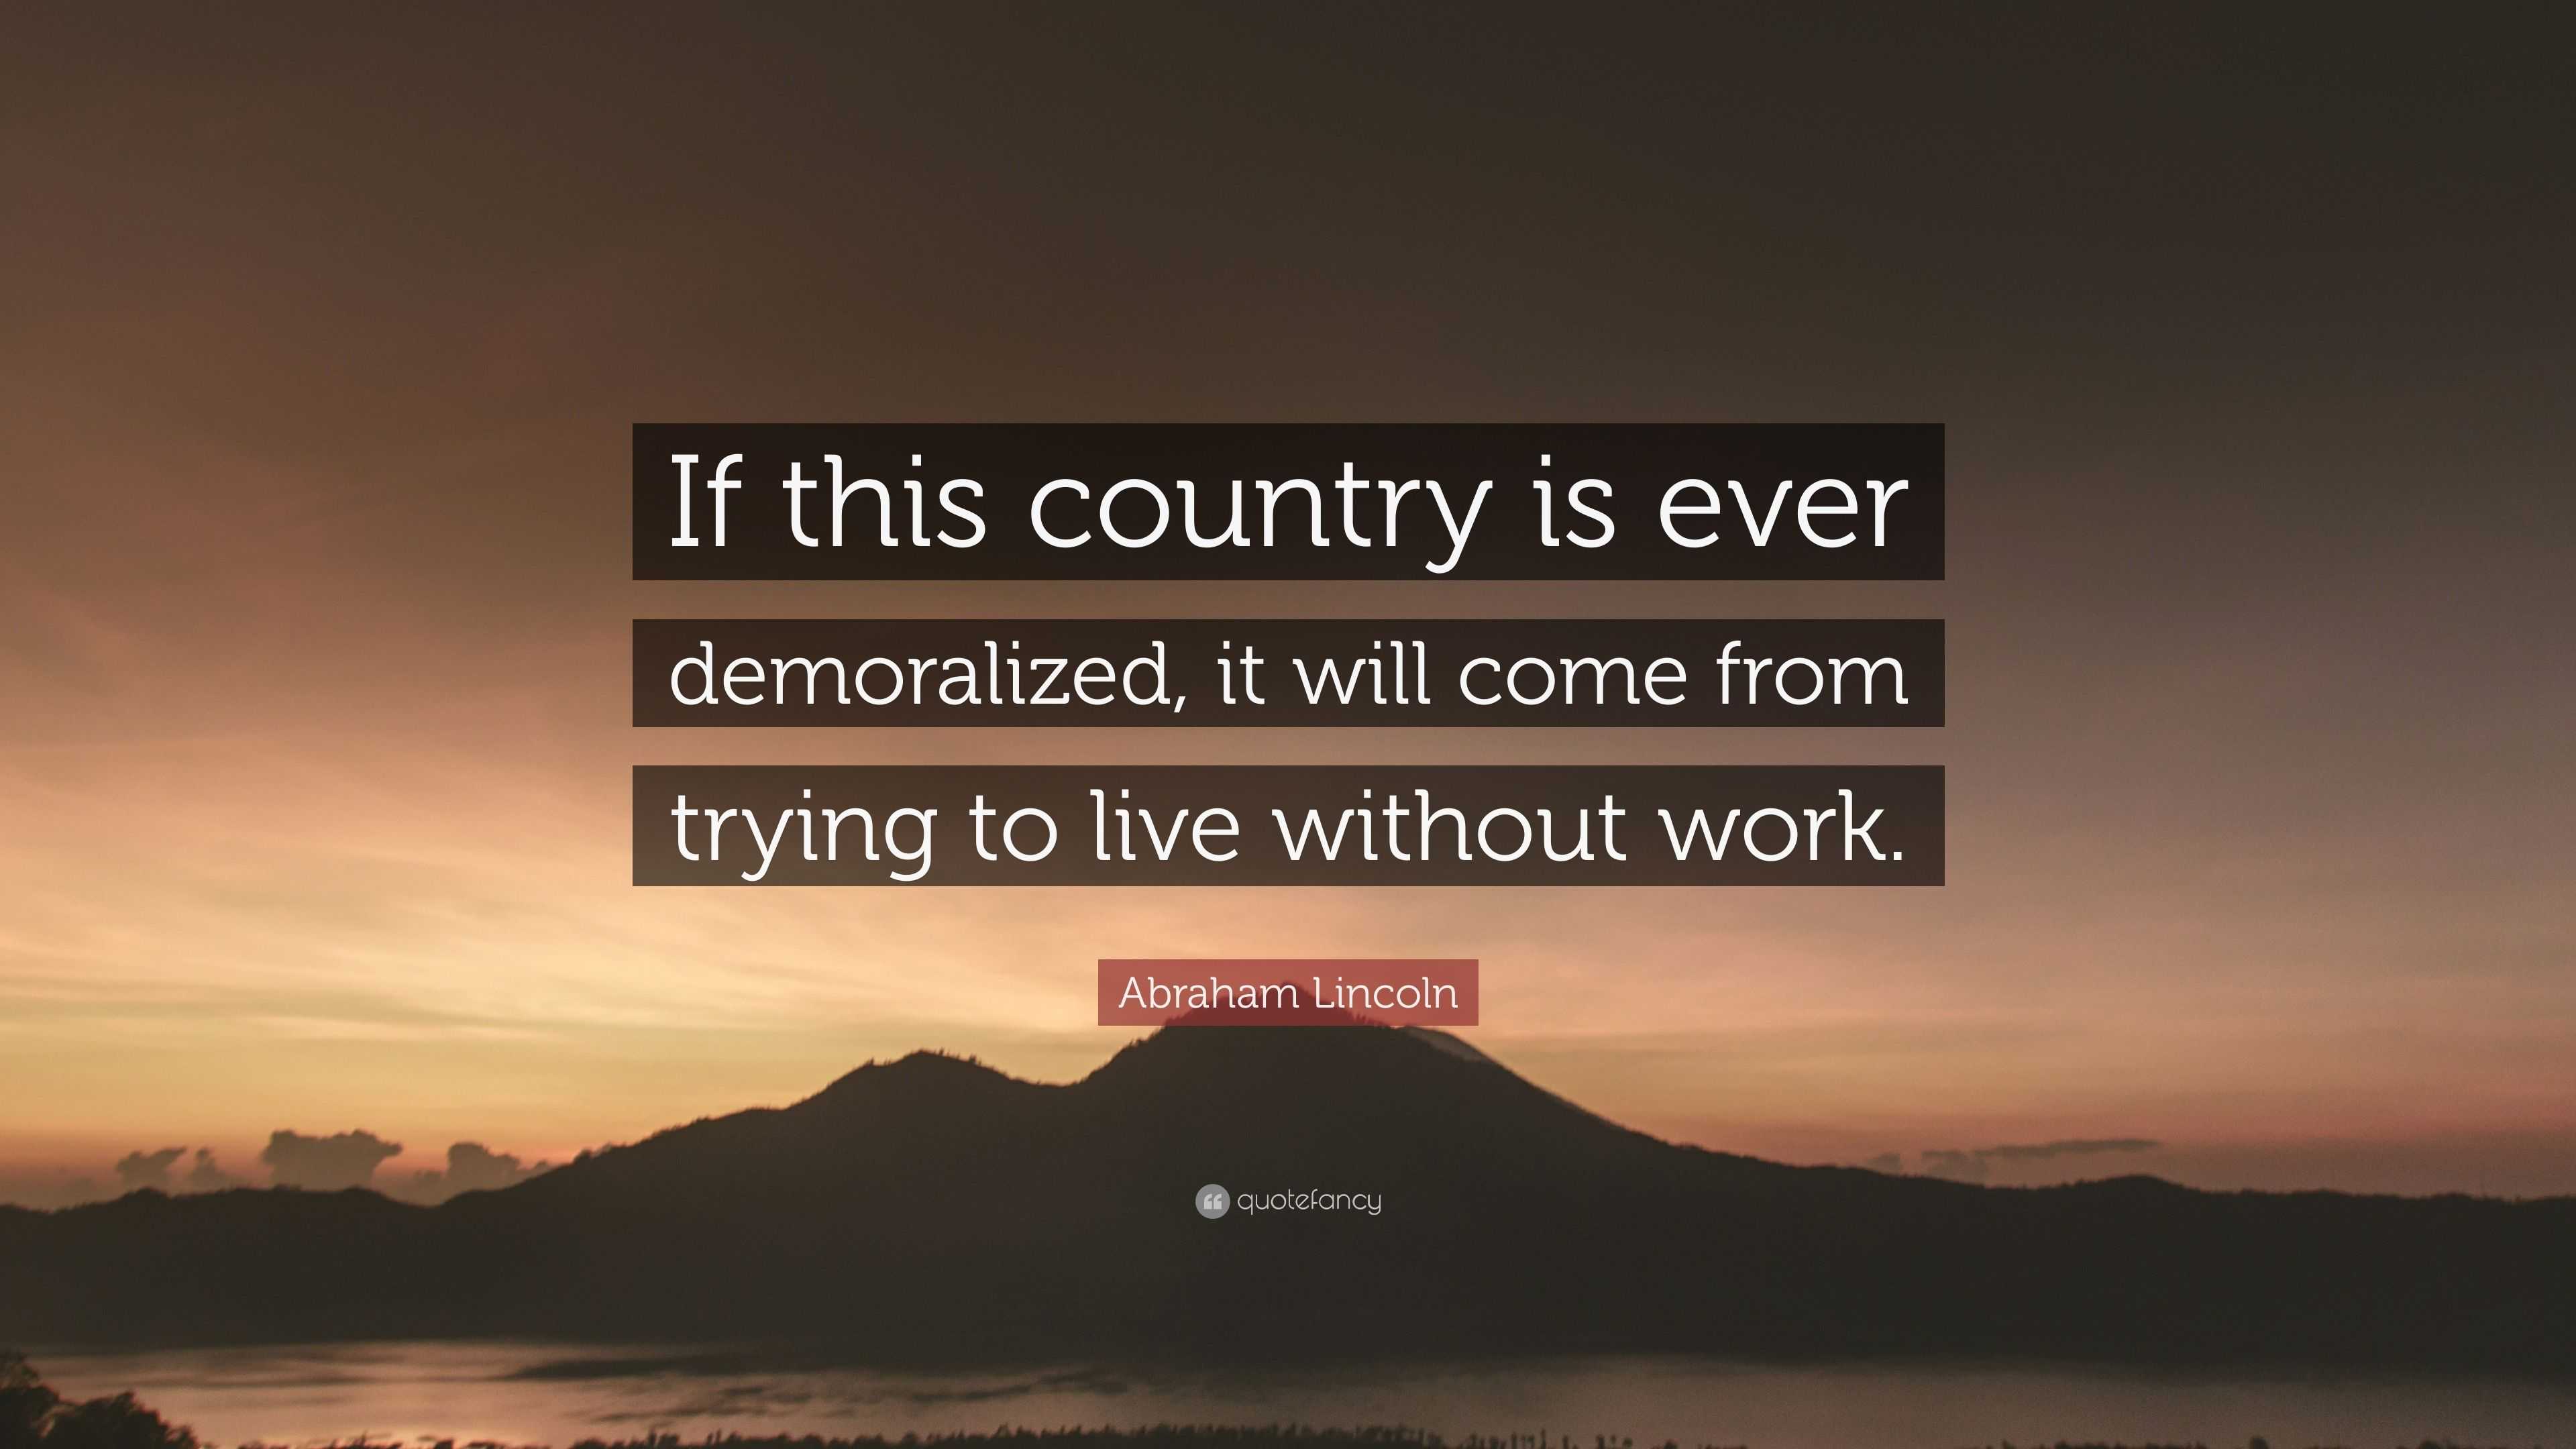 Abraham Lincoln Quote: “If this country is ever demoralized, it will ...